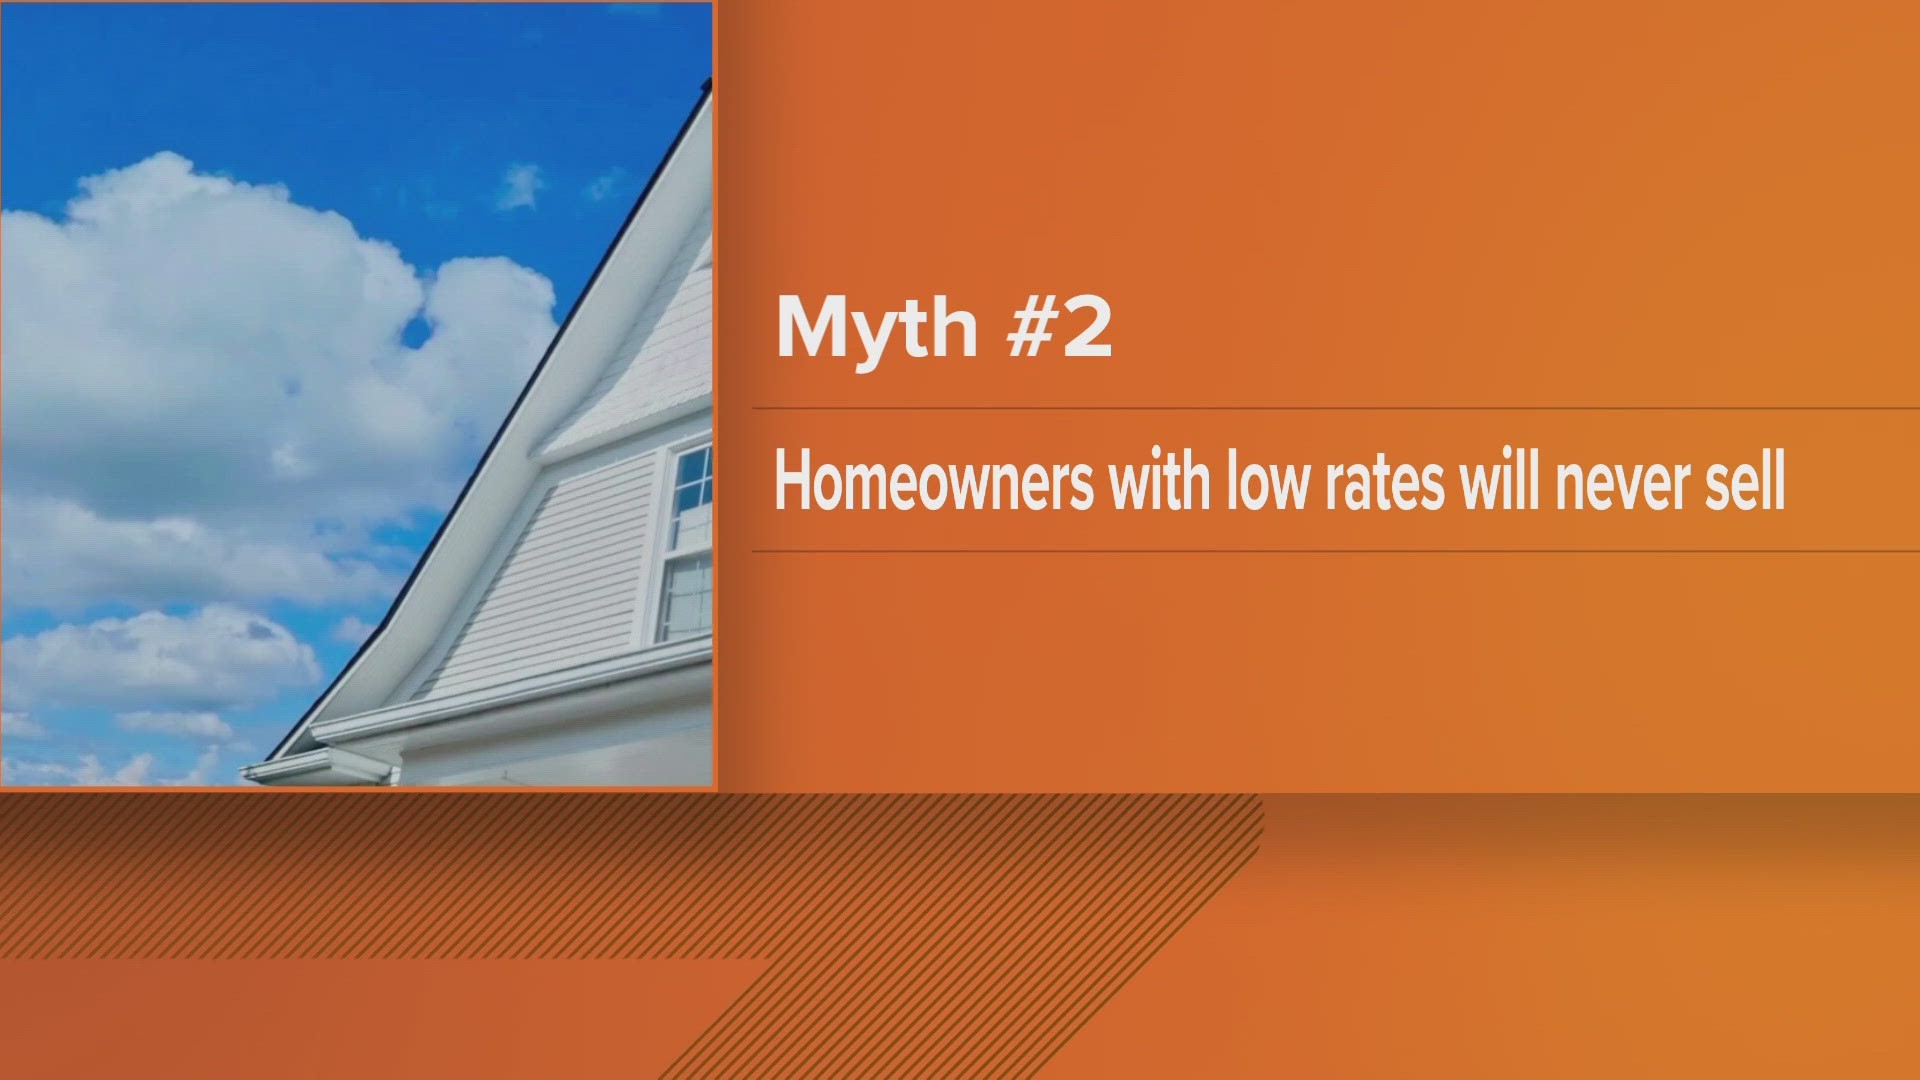 From rising mortgage rates to affordability problems, many priced out homebuyers are sitting on the sidelines for now. Lane Lyon debunks common real estate myths.